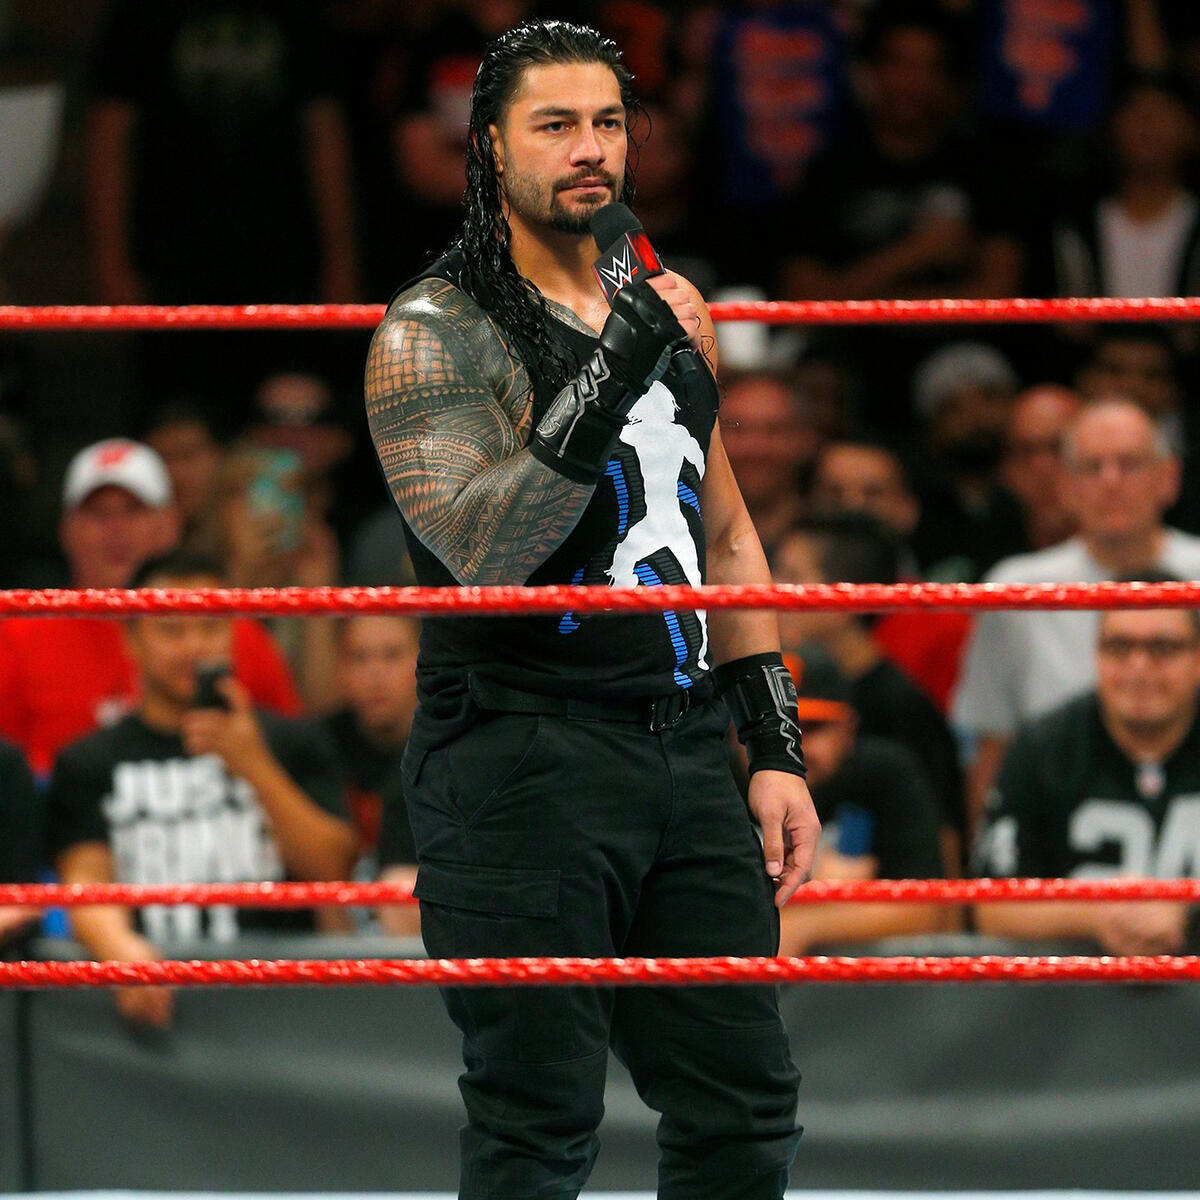 Roman Reigns delivers a parting shot to John Cena: photos | WWE